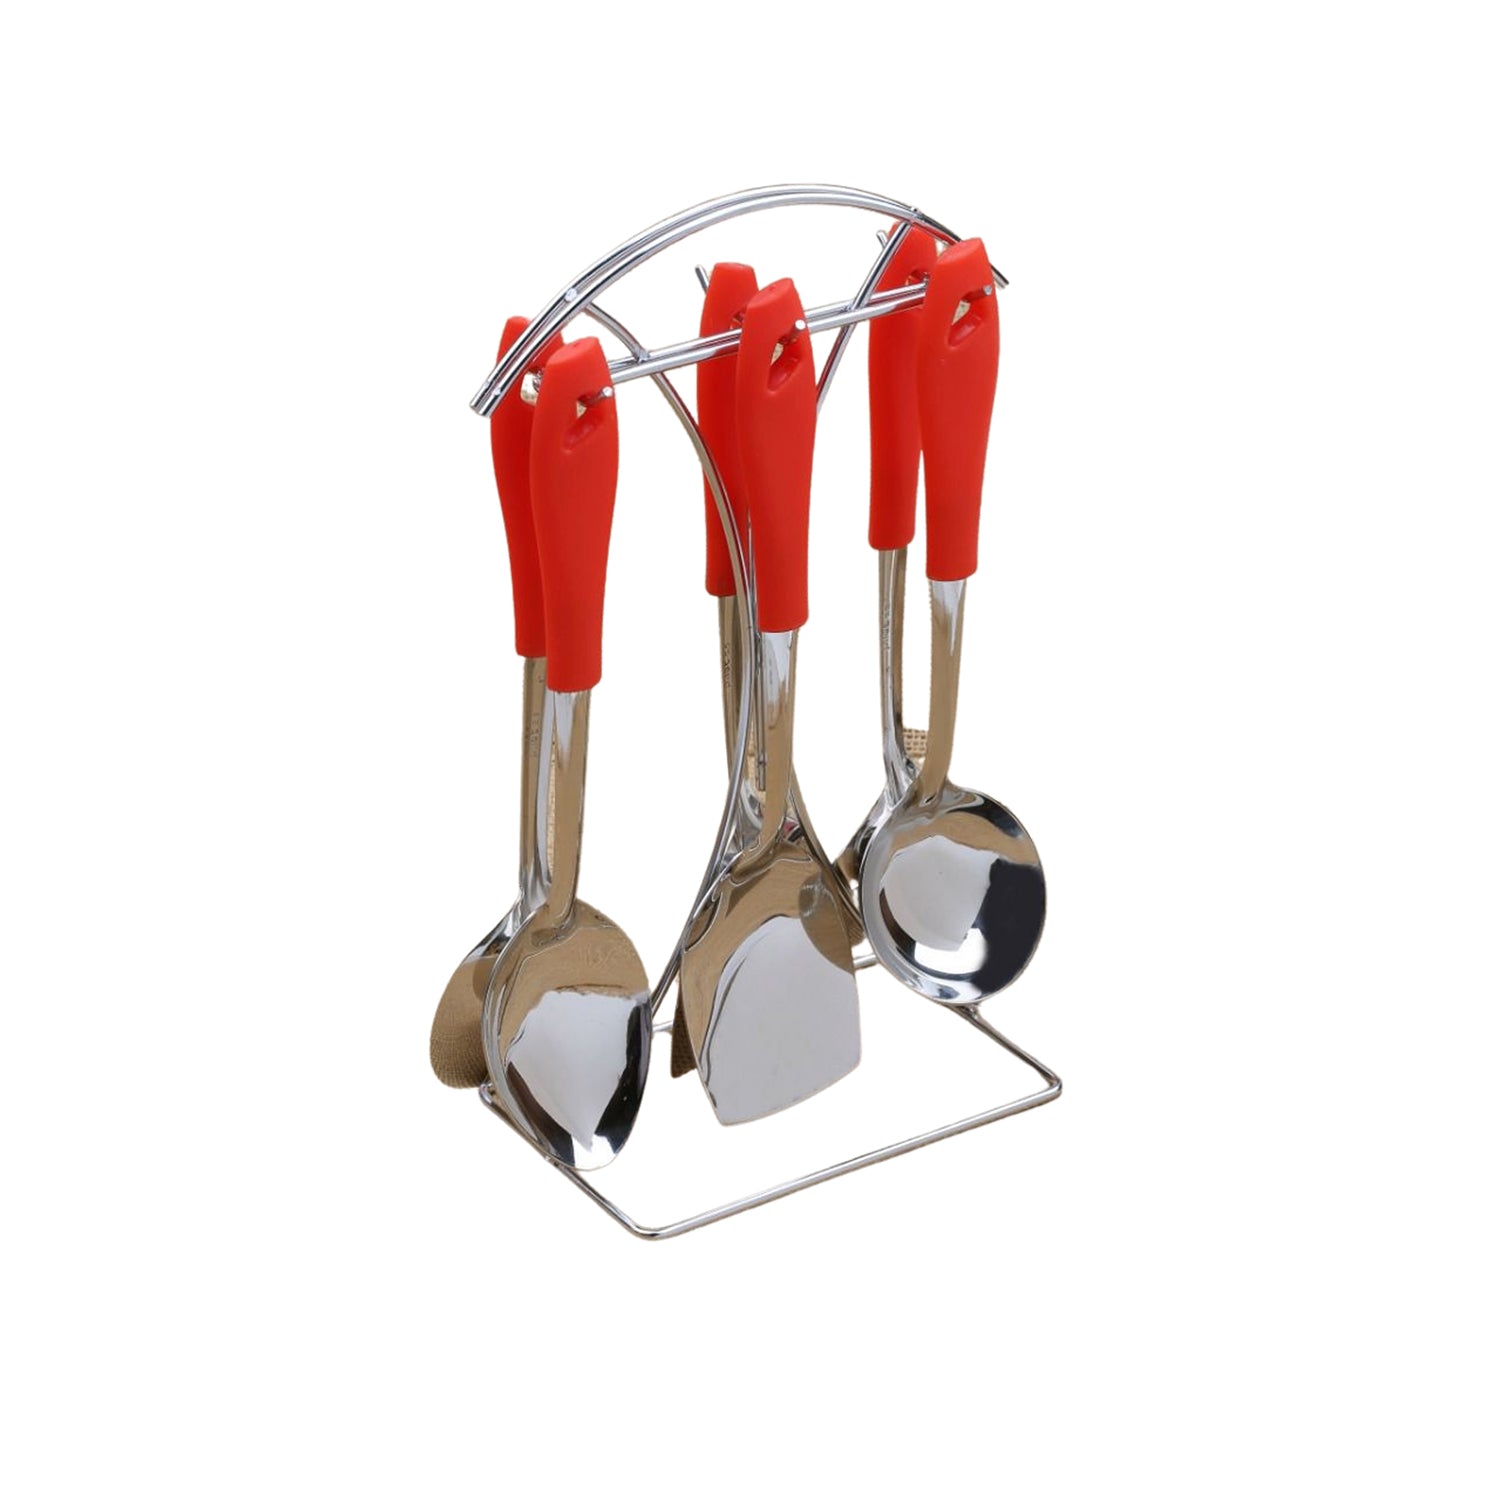 2701 6 Pc SS Serving Spoon stand used in all kinds of household and kitchen places for holding spoons etc.